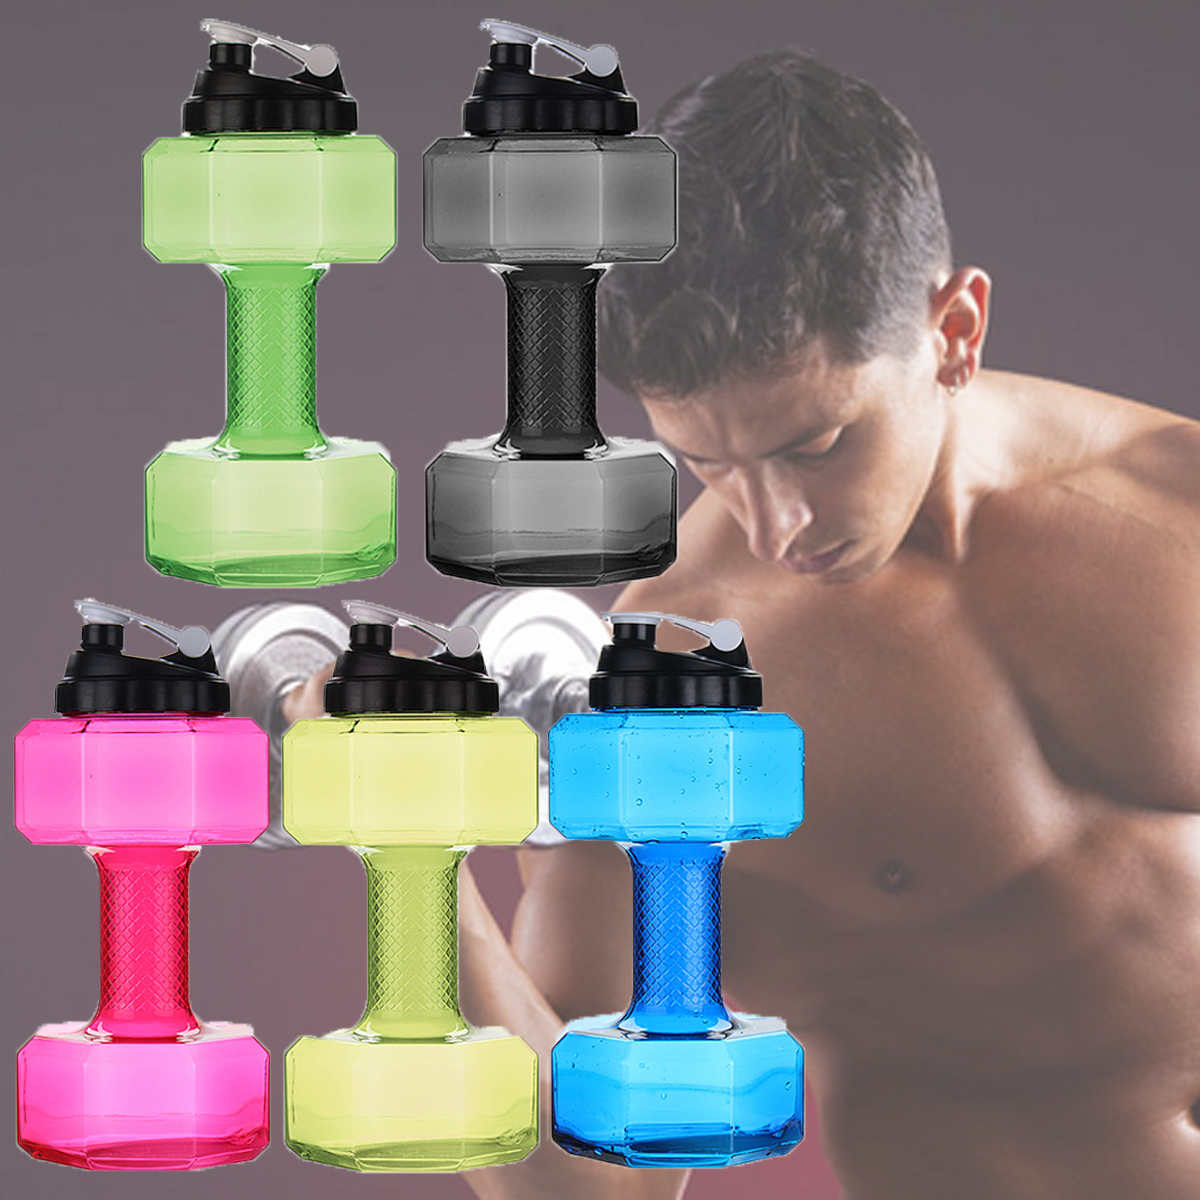 25L-Large-Capacity-BPA-Free-Gym-Training-Drink-Dumbbell-Water-Bottle-Travel-Sport-Cup-Kettle-Jug-1158772